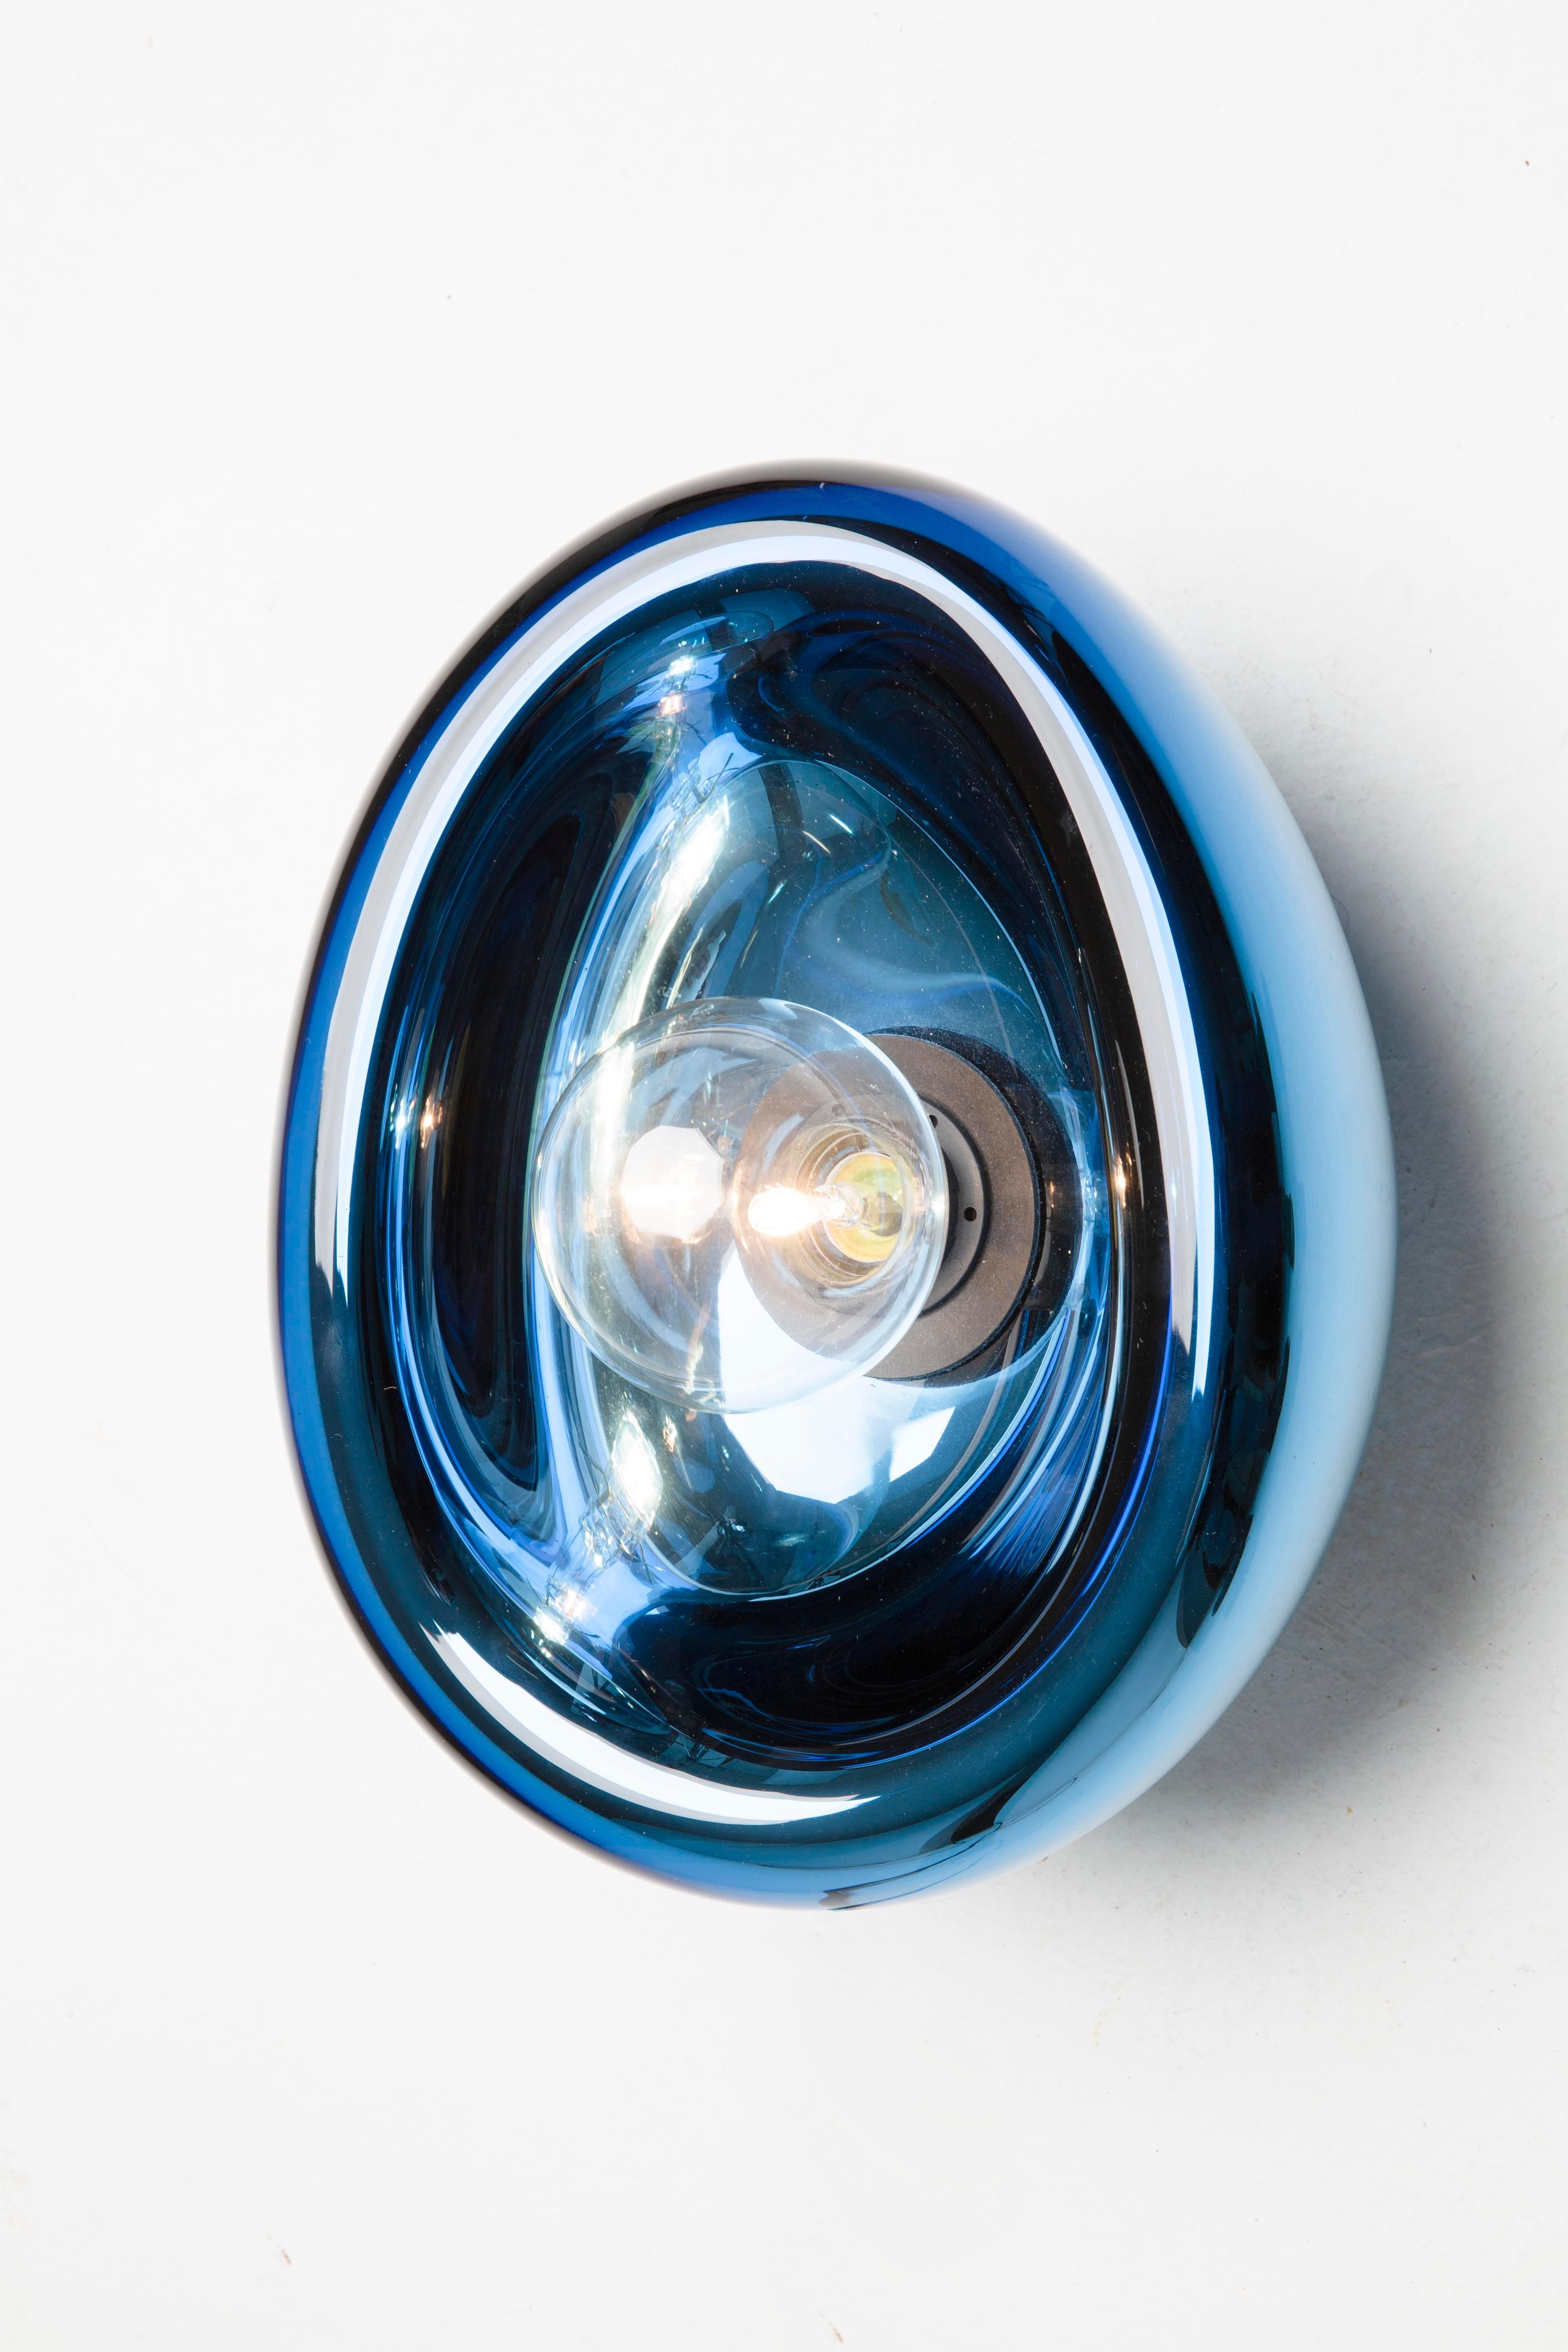 Medium aurum blue glass sconces by Alex de Witte
Dimensions: D 25 x H 35 cm
Materials: Mouth blown glass
It can be purchased as an ensemble or individual, in different dimensions and colors.


Aurum shows how Alex de Witte is able to convey